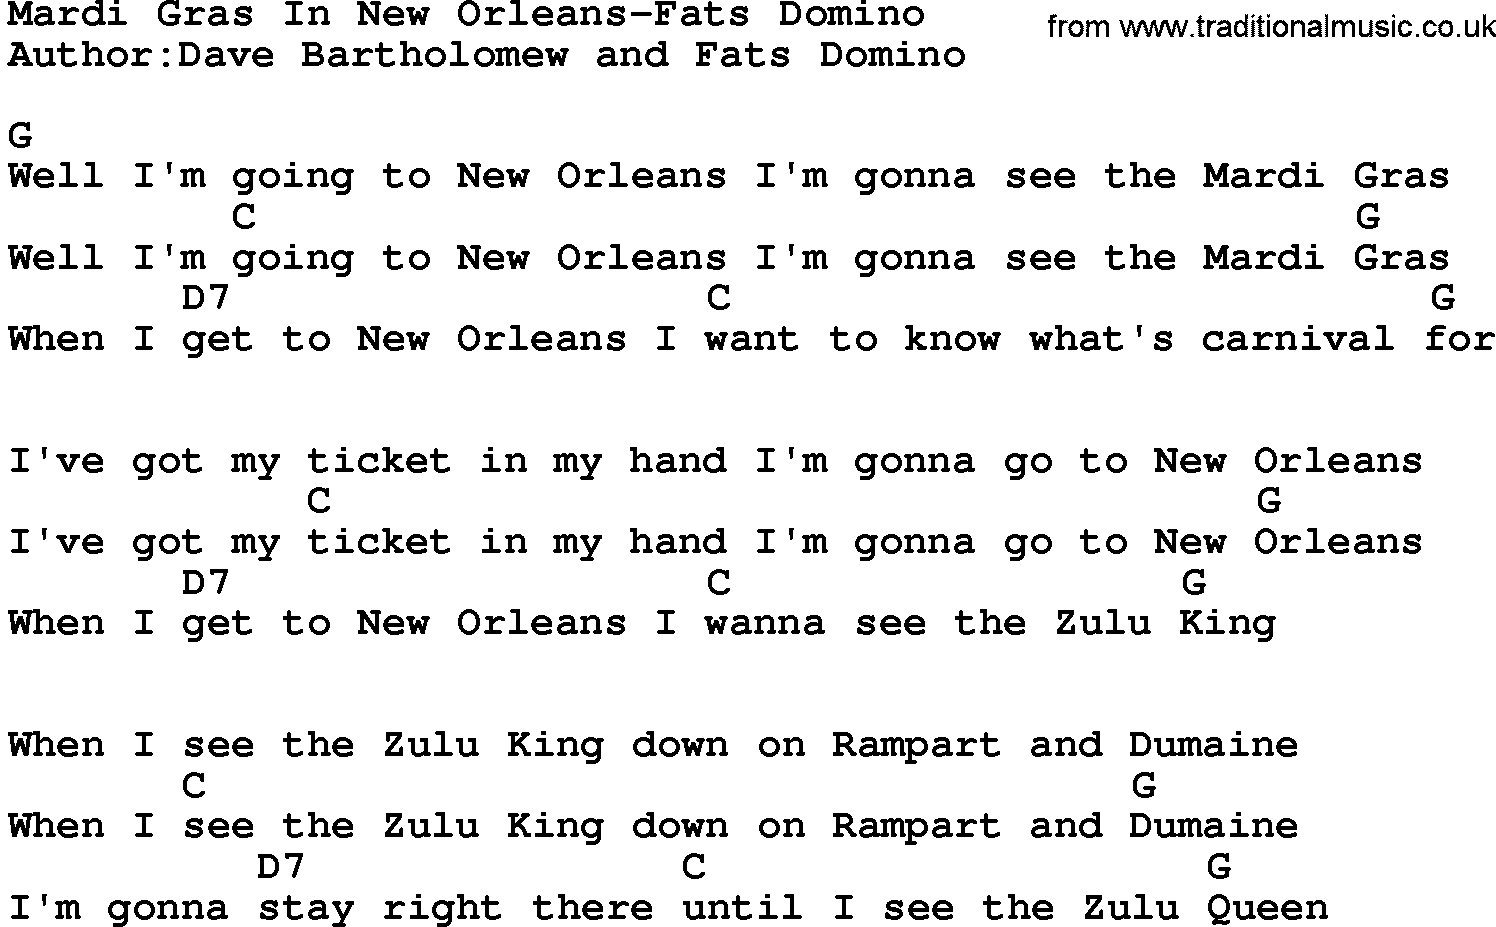 Country music song: Mardi Gras In New Orleans-Fats Domino lyrics and chords